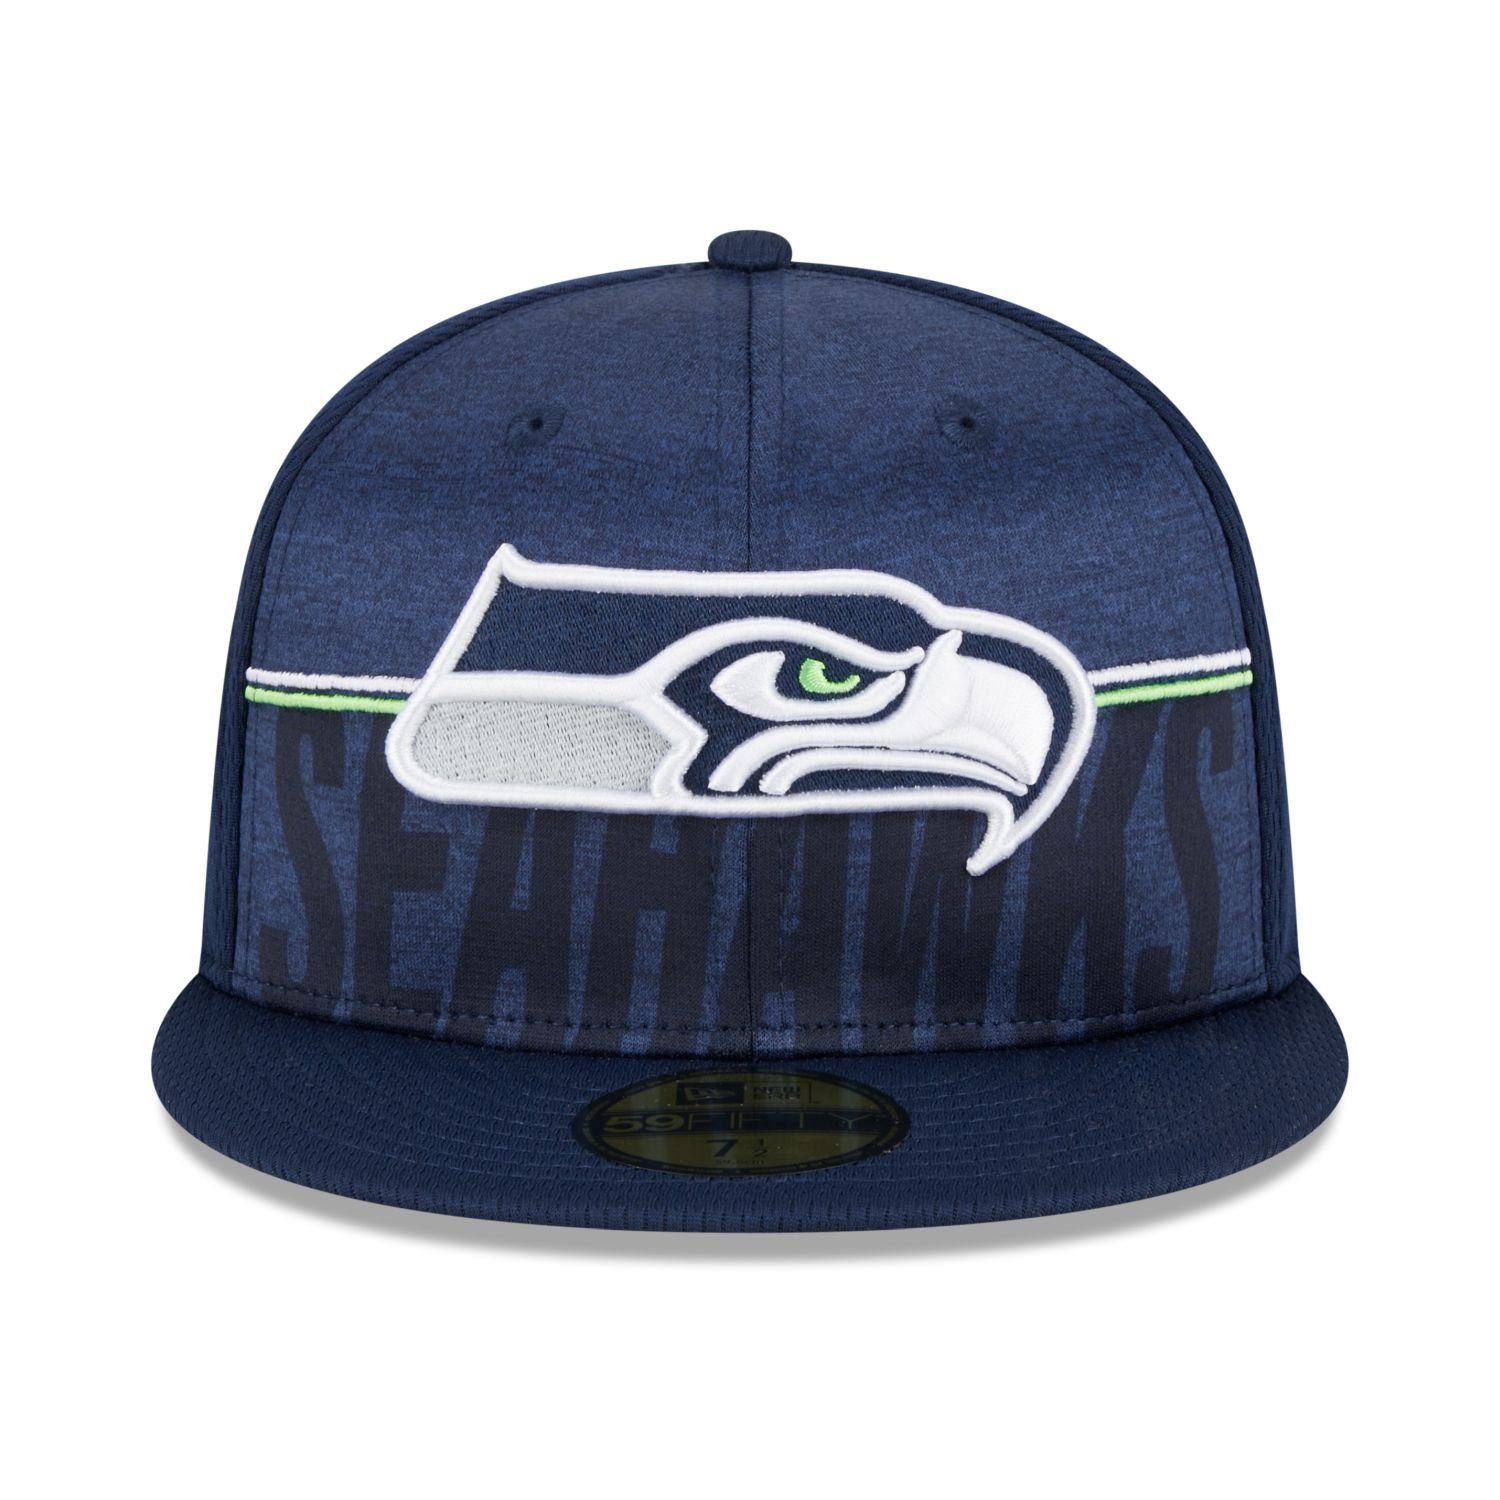 New Era Fitted Cap 59Fifty TRAINING Seahawks Seattle NFL